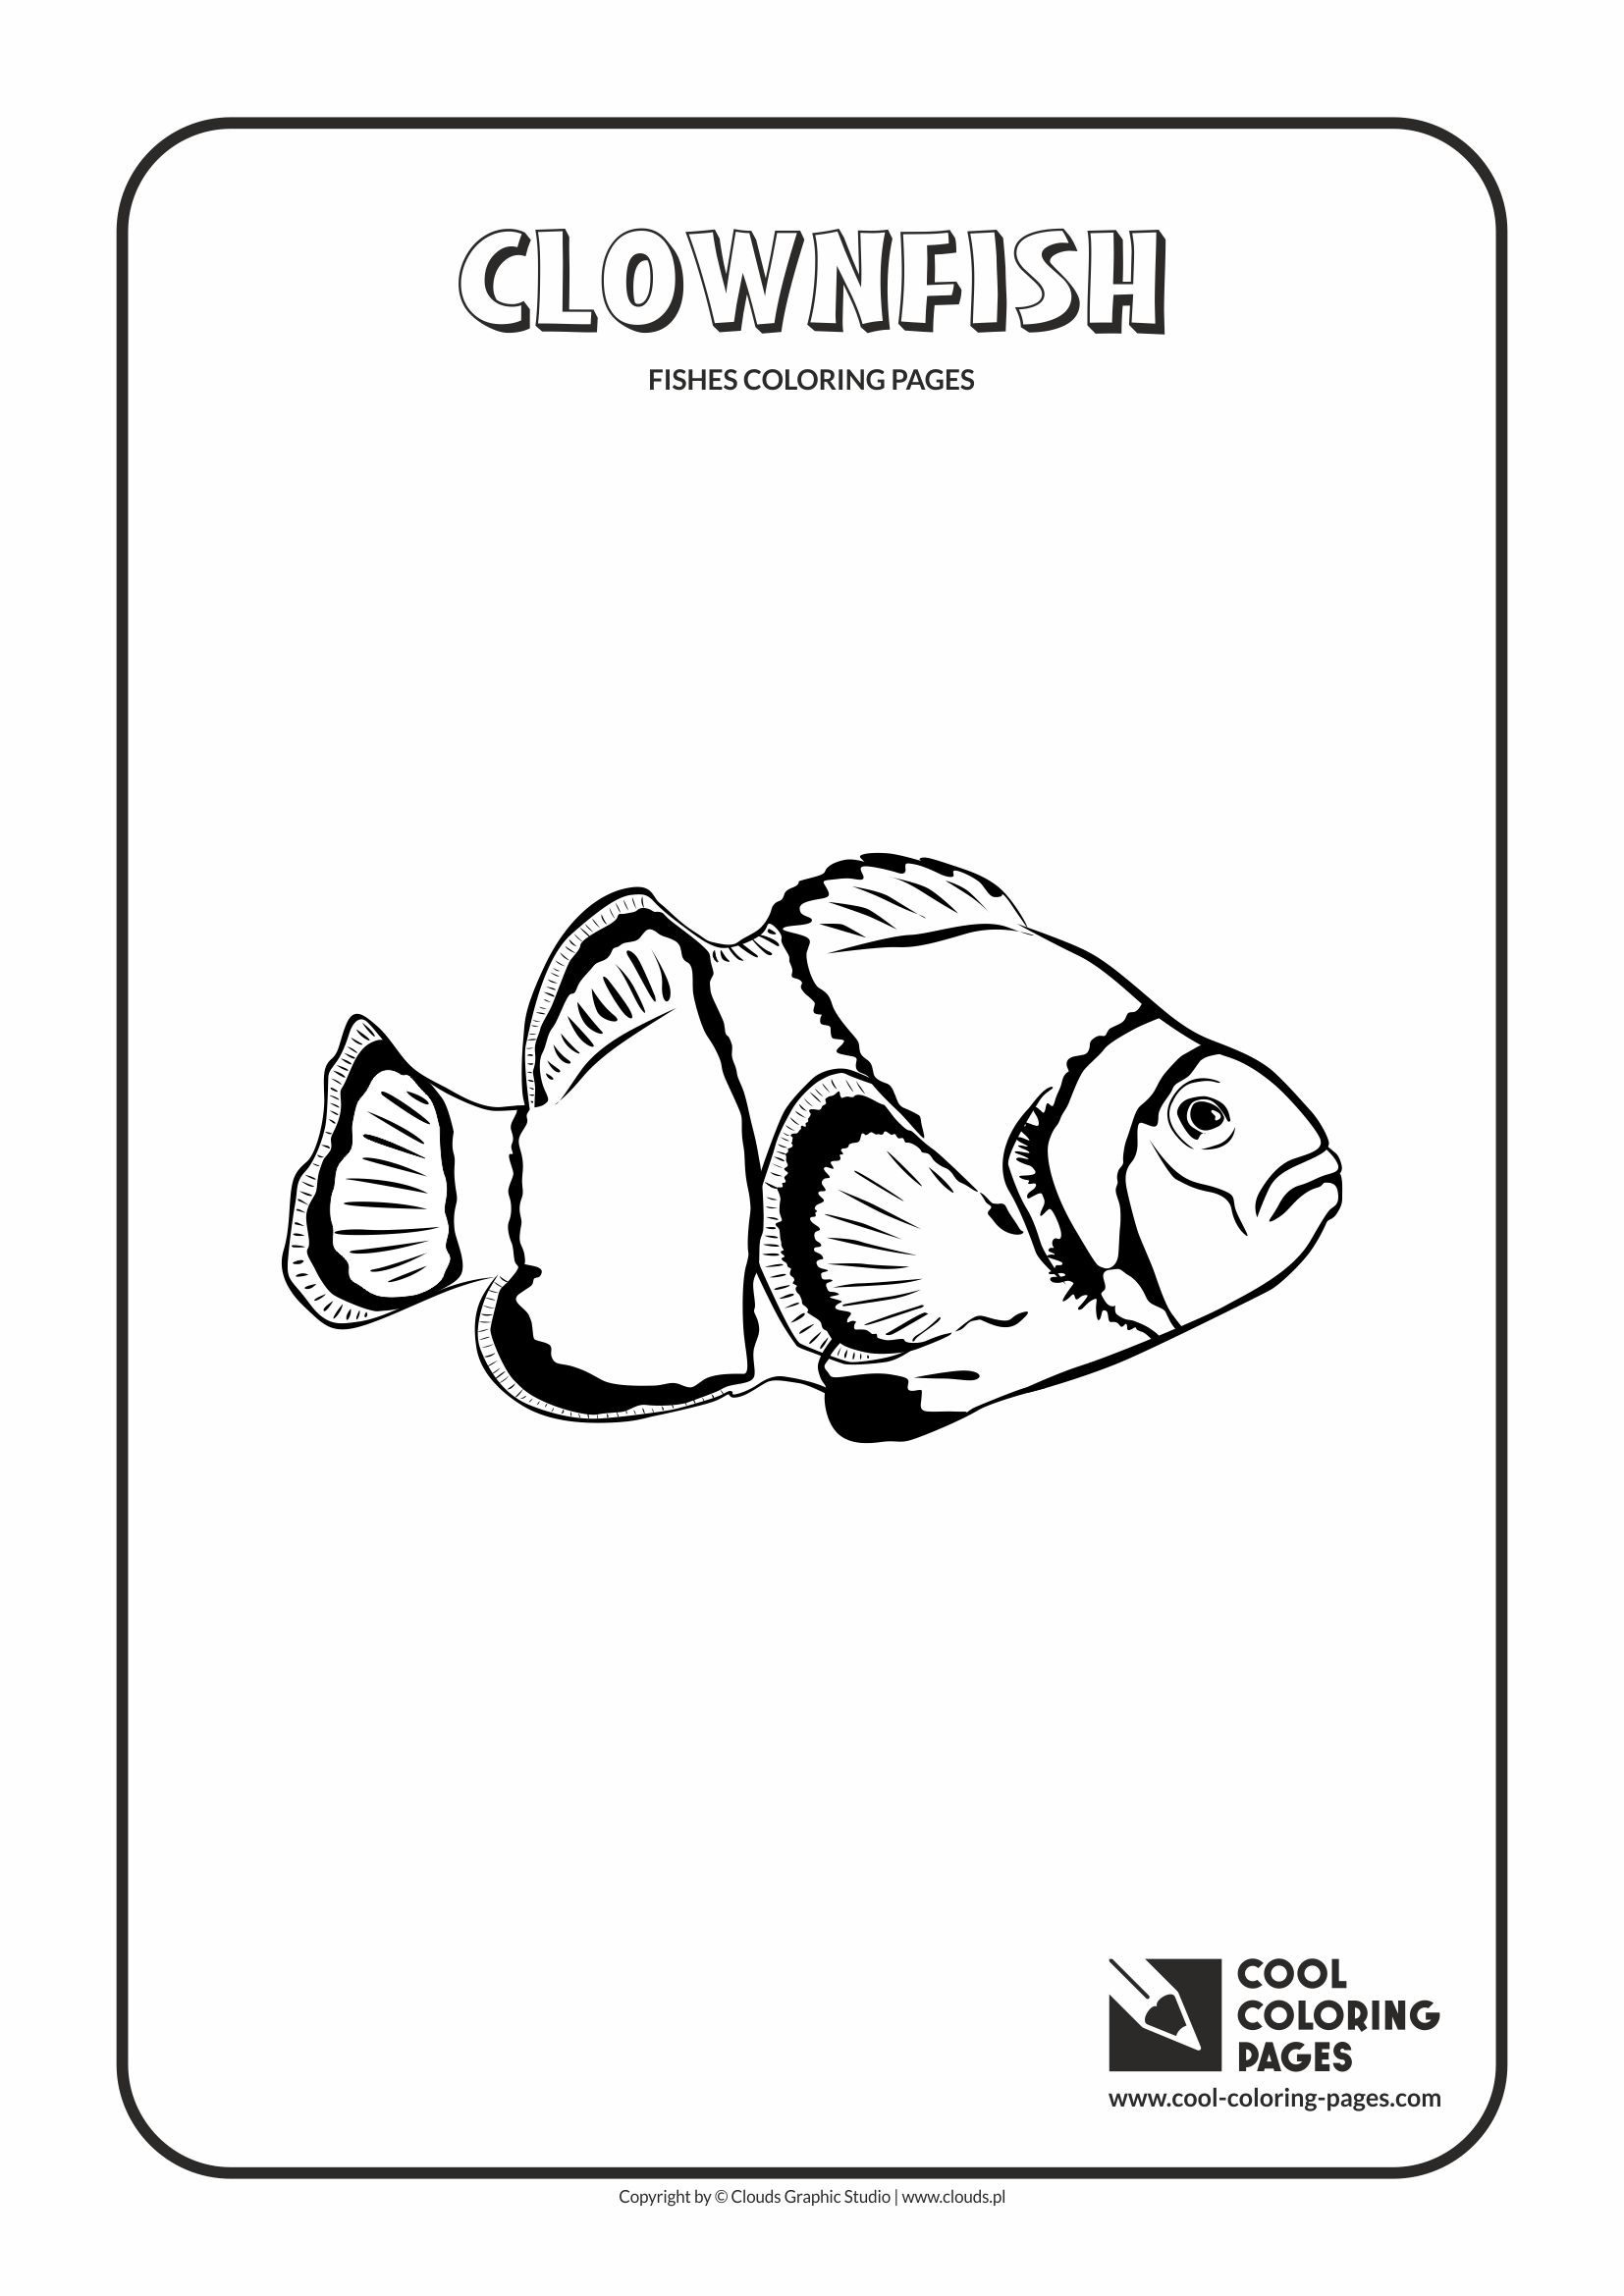 Cool Coloring Pages - Animals / Clownfish / Coloring page with clownfish